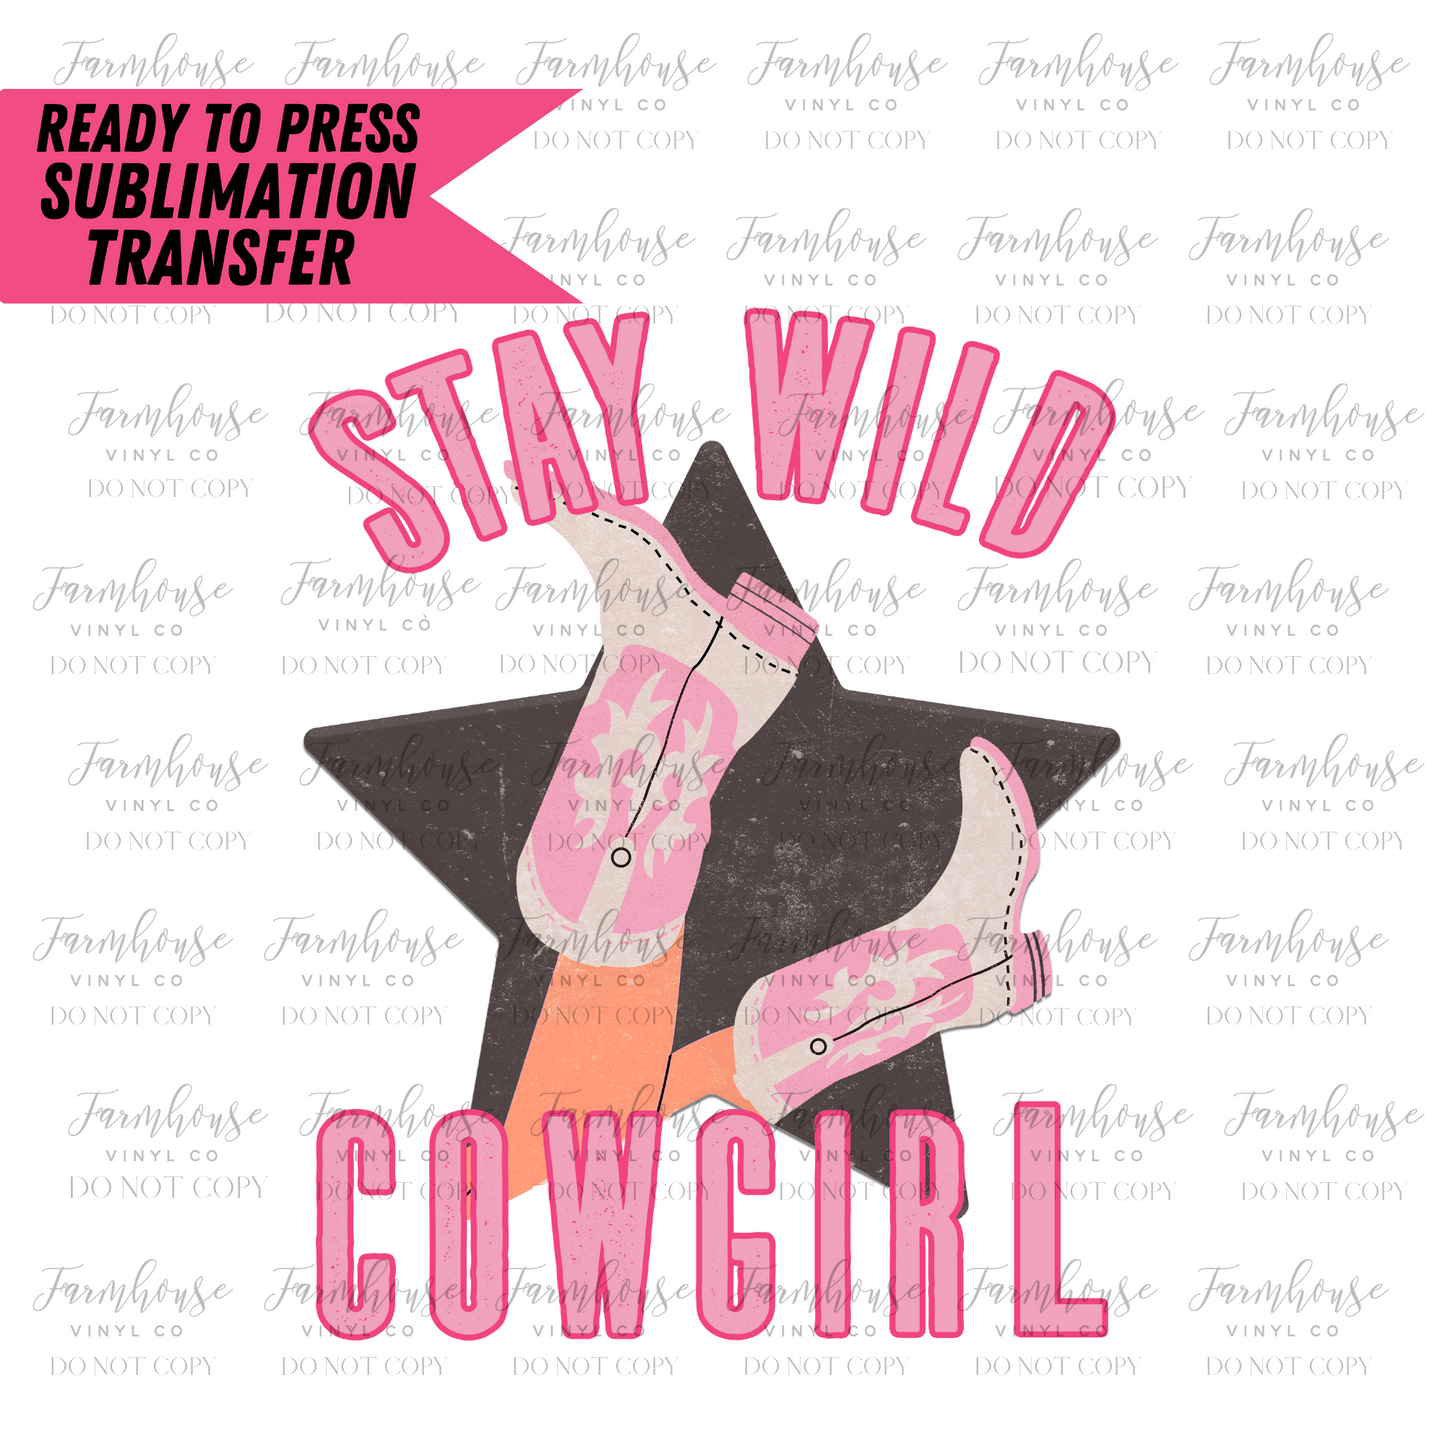 Stay Wild Cowgirl Ready To Press Sublimation Transfer - Farmhouse Vinyl Co